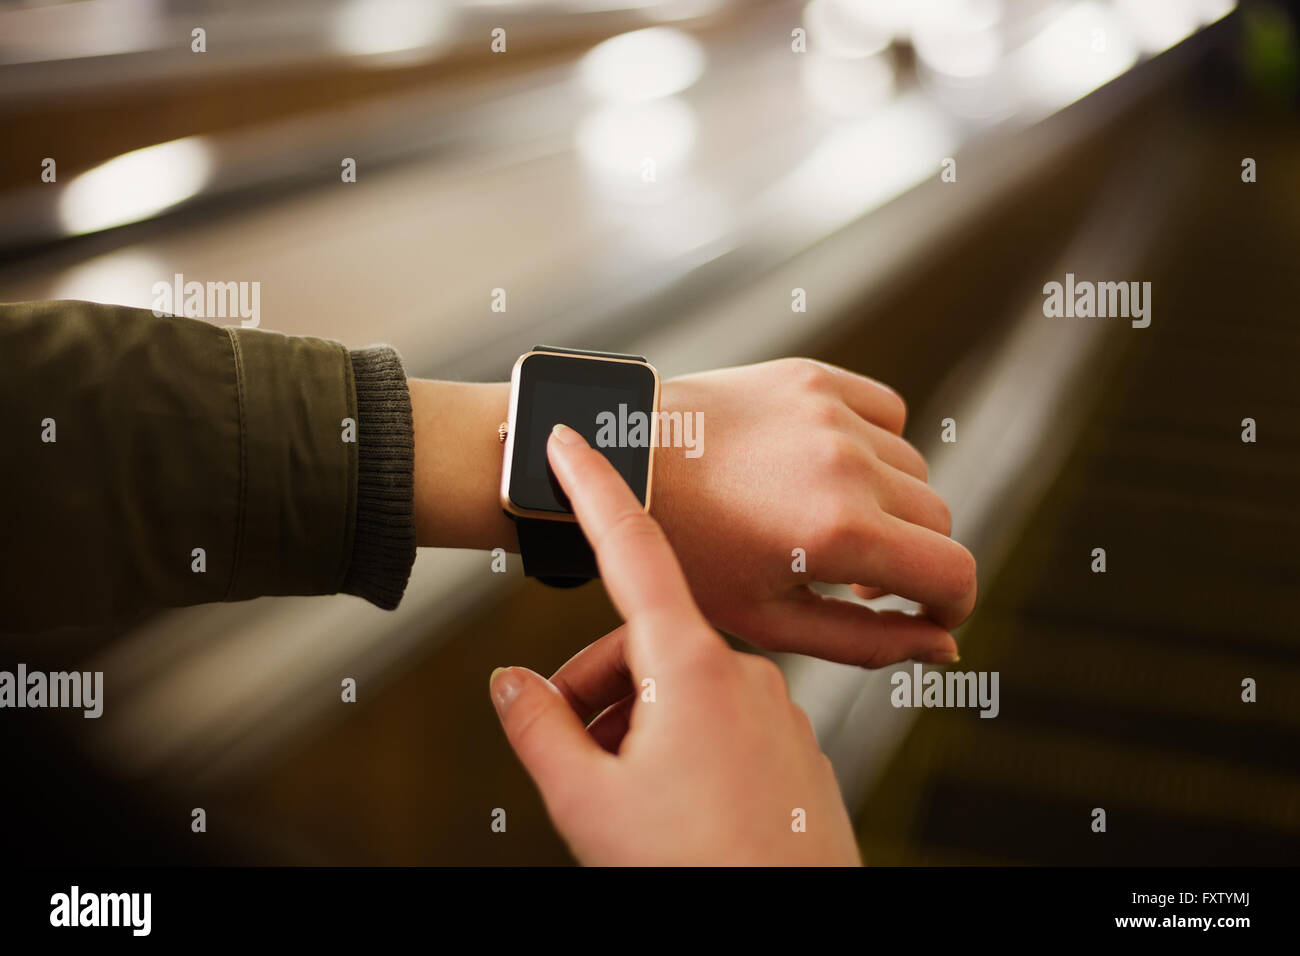 Woman using her smart watch while riding escalator in metro. This new device lets you always stay connected to internet and social media networks from anywhere you want. Stock Photo